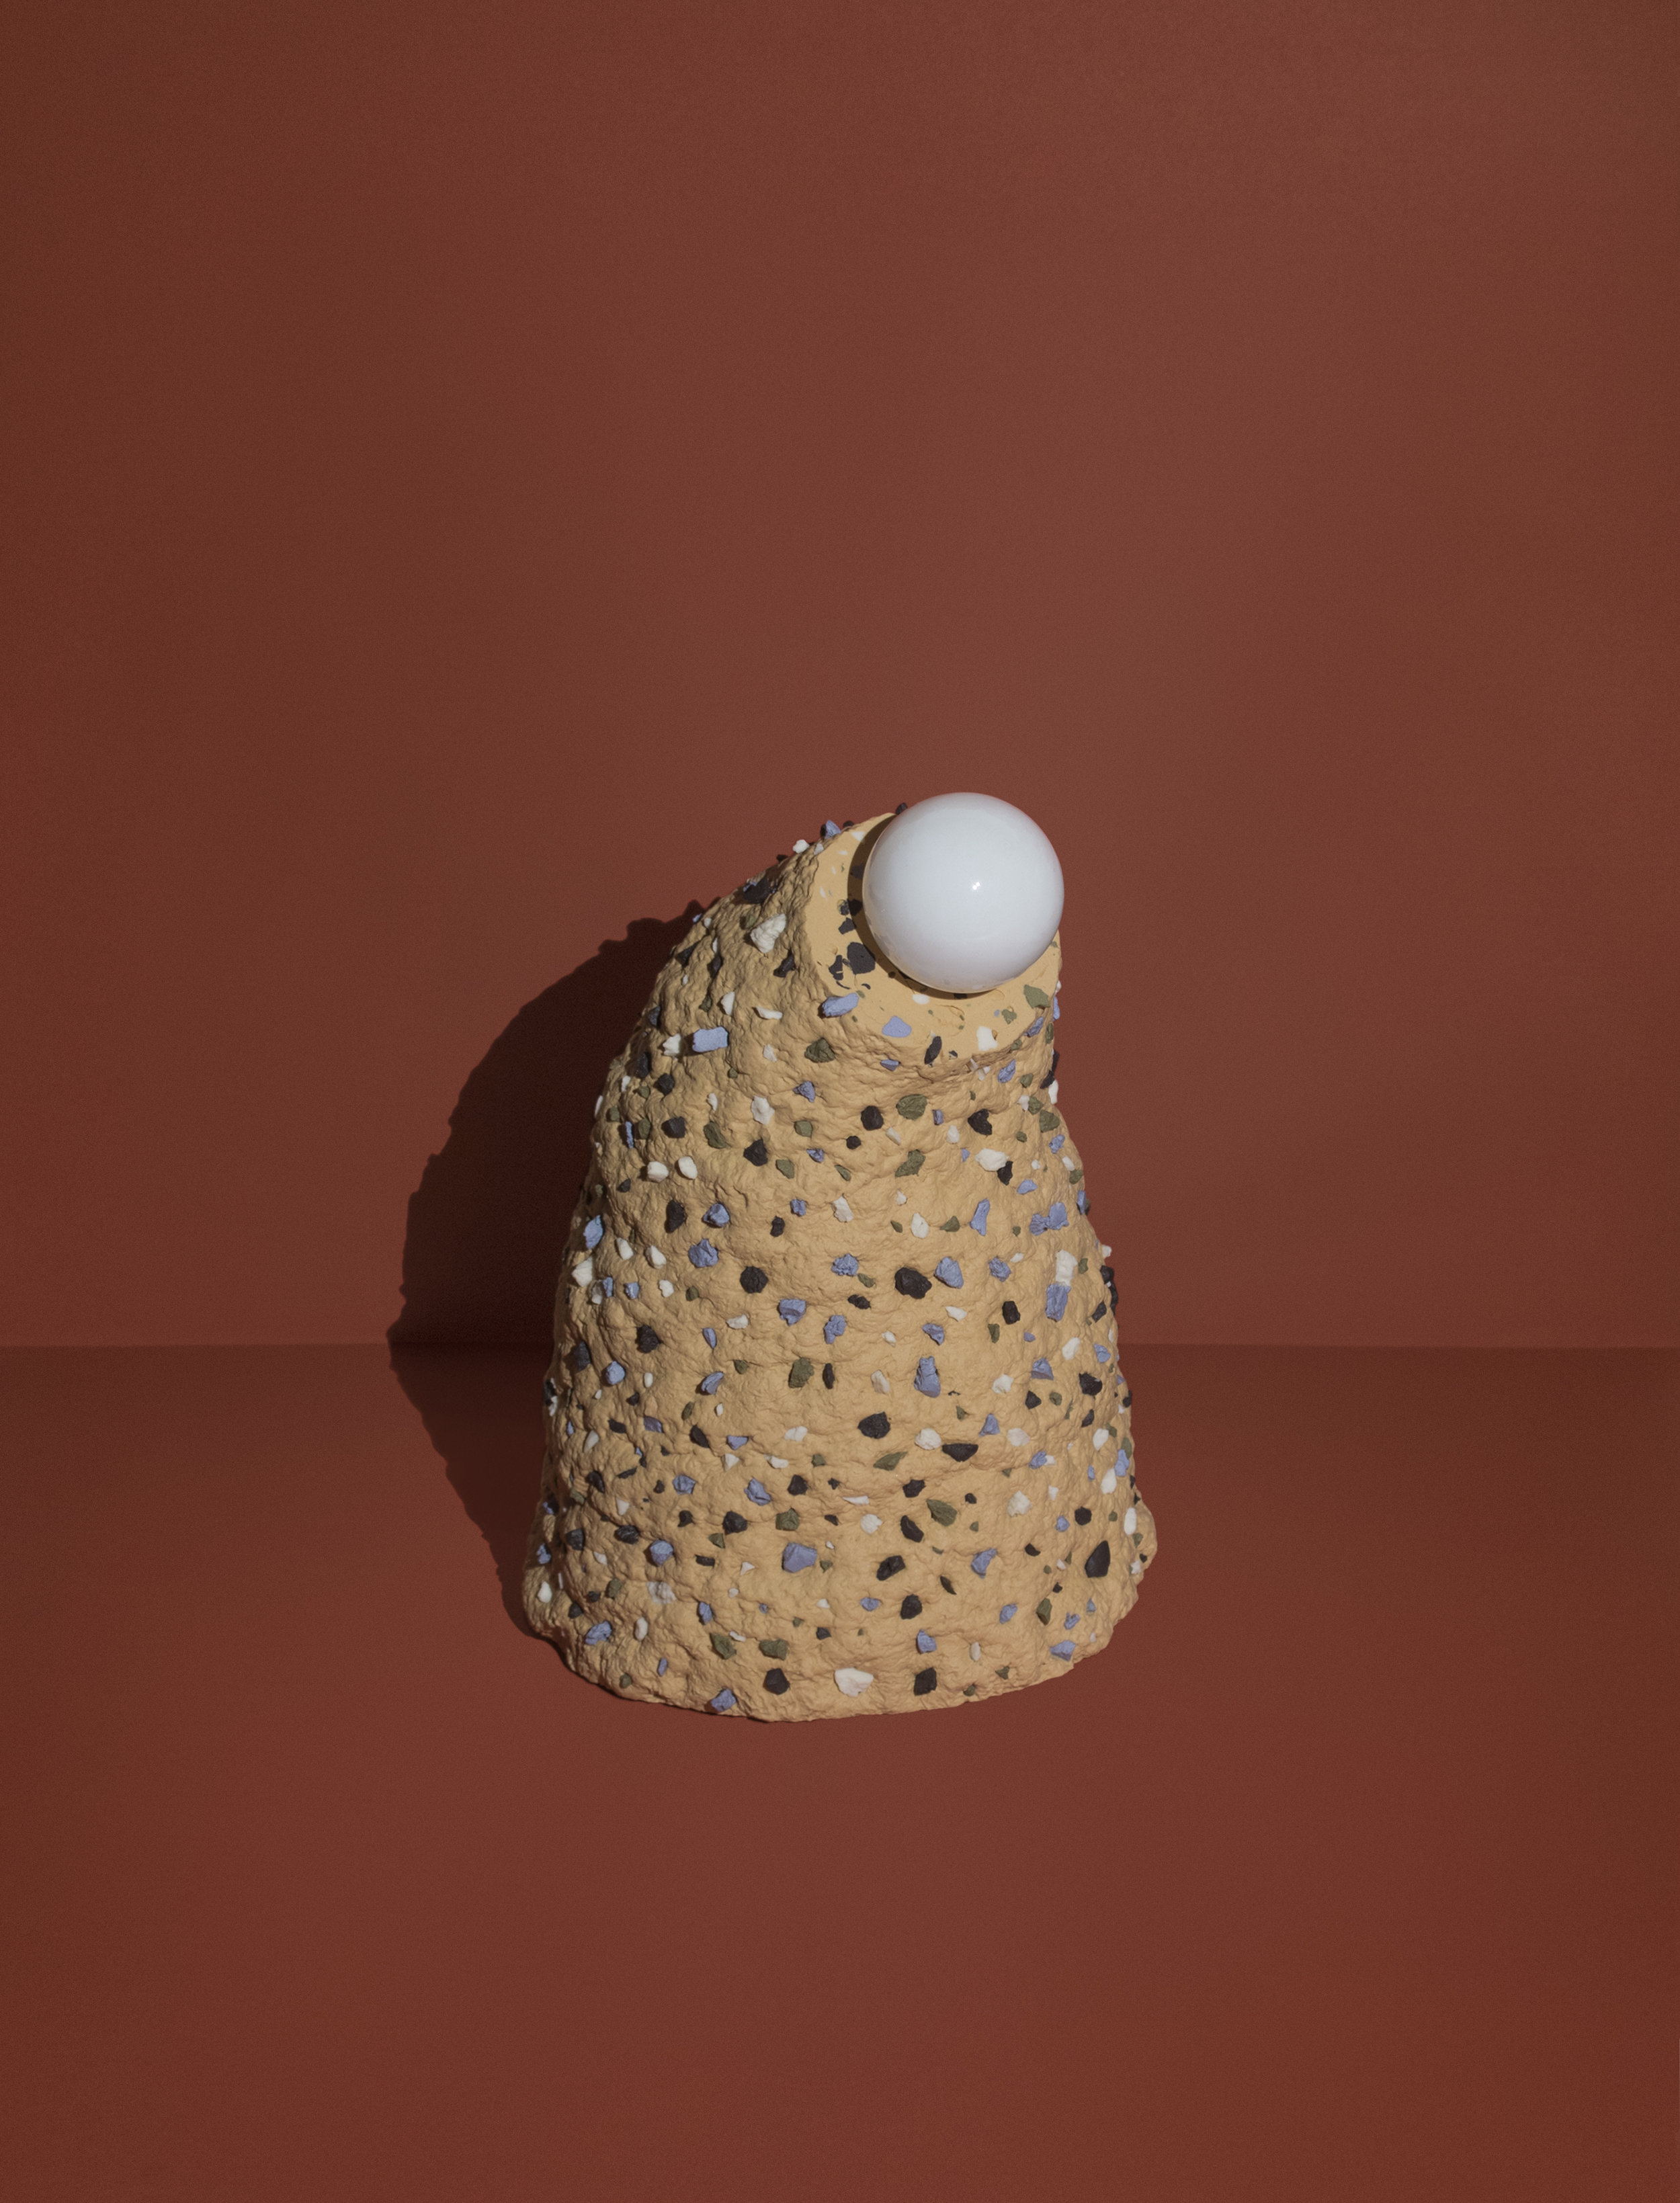  Conglomerate Lamp (Tan):  10x7x7"  Highly Pigmented Porcelain 